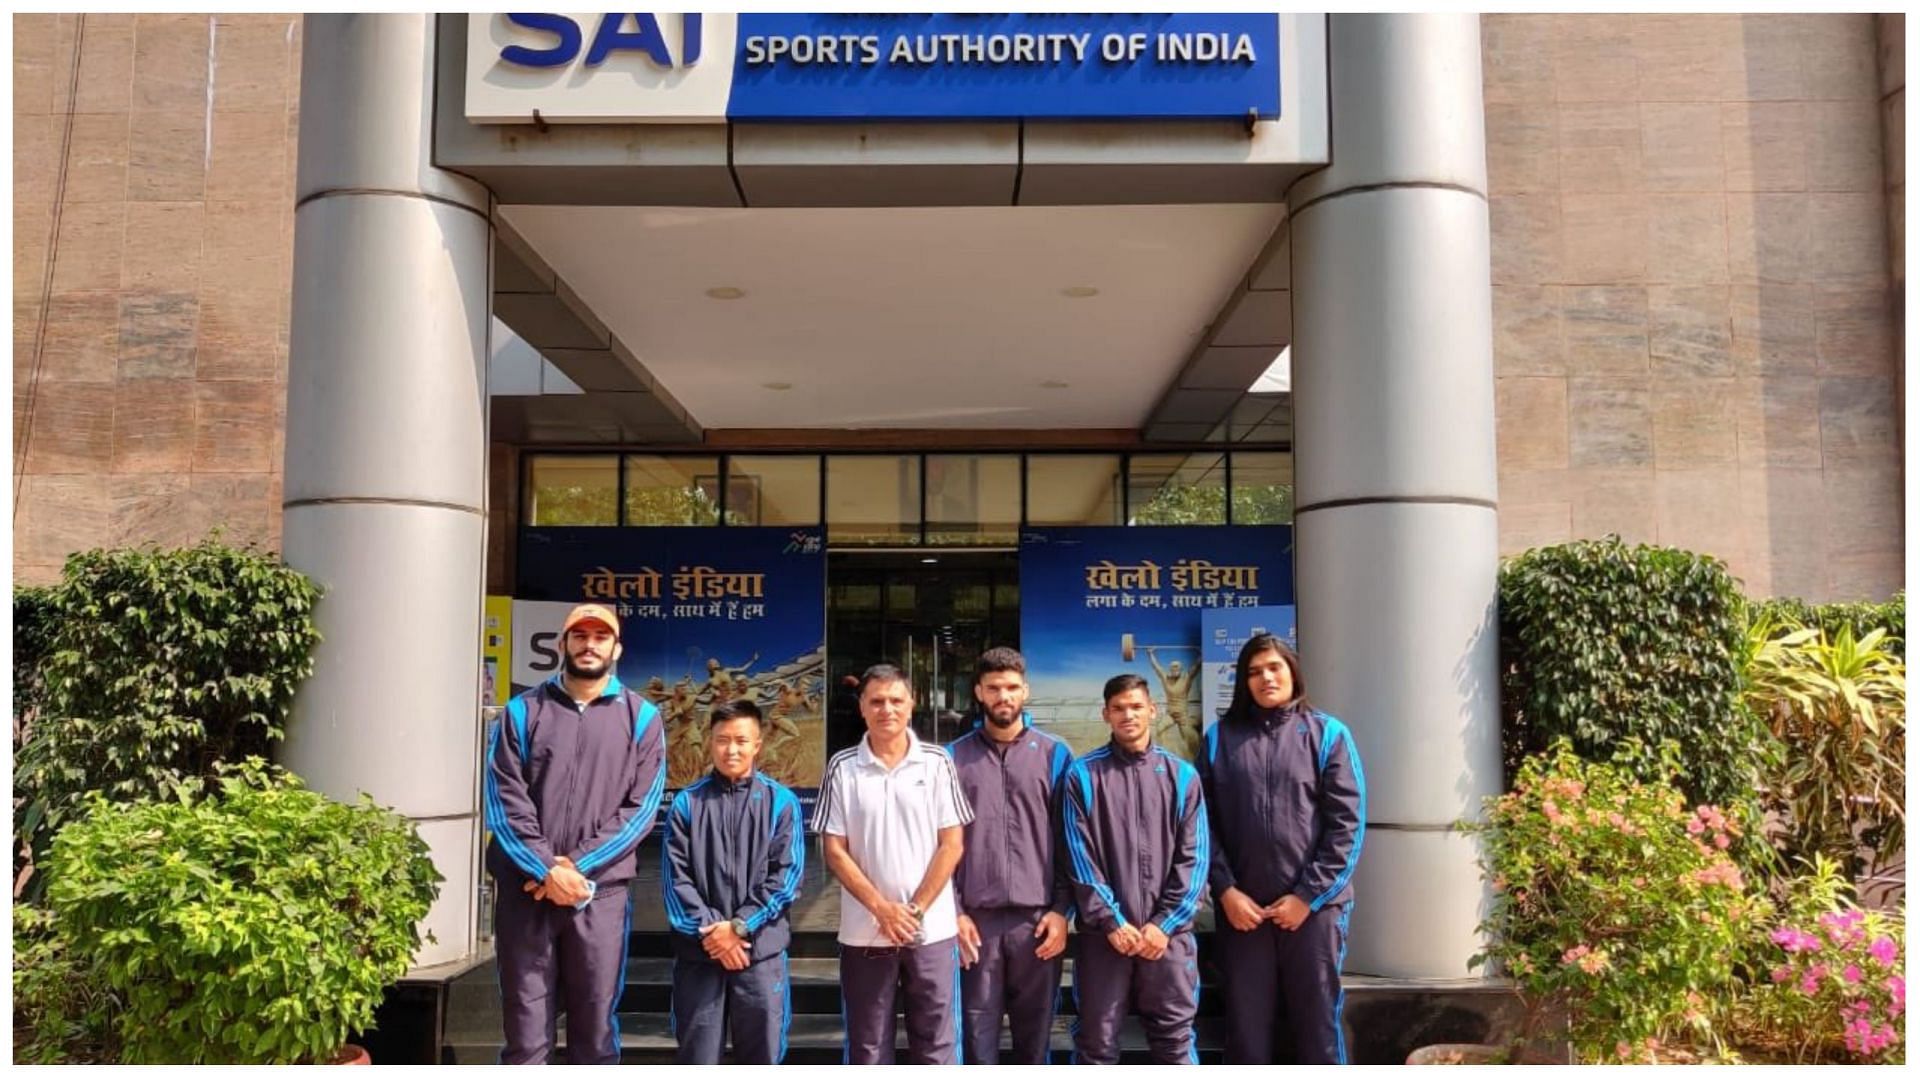 The Indian Judo team at the Sports Authority of India (Pic Credit: SAI)